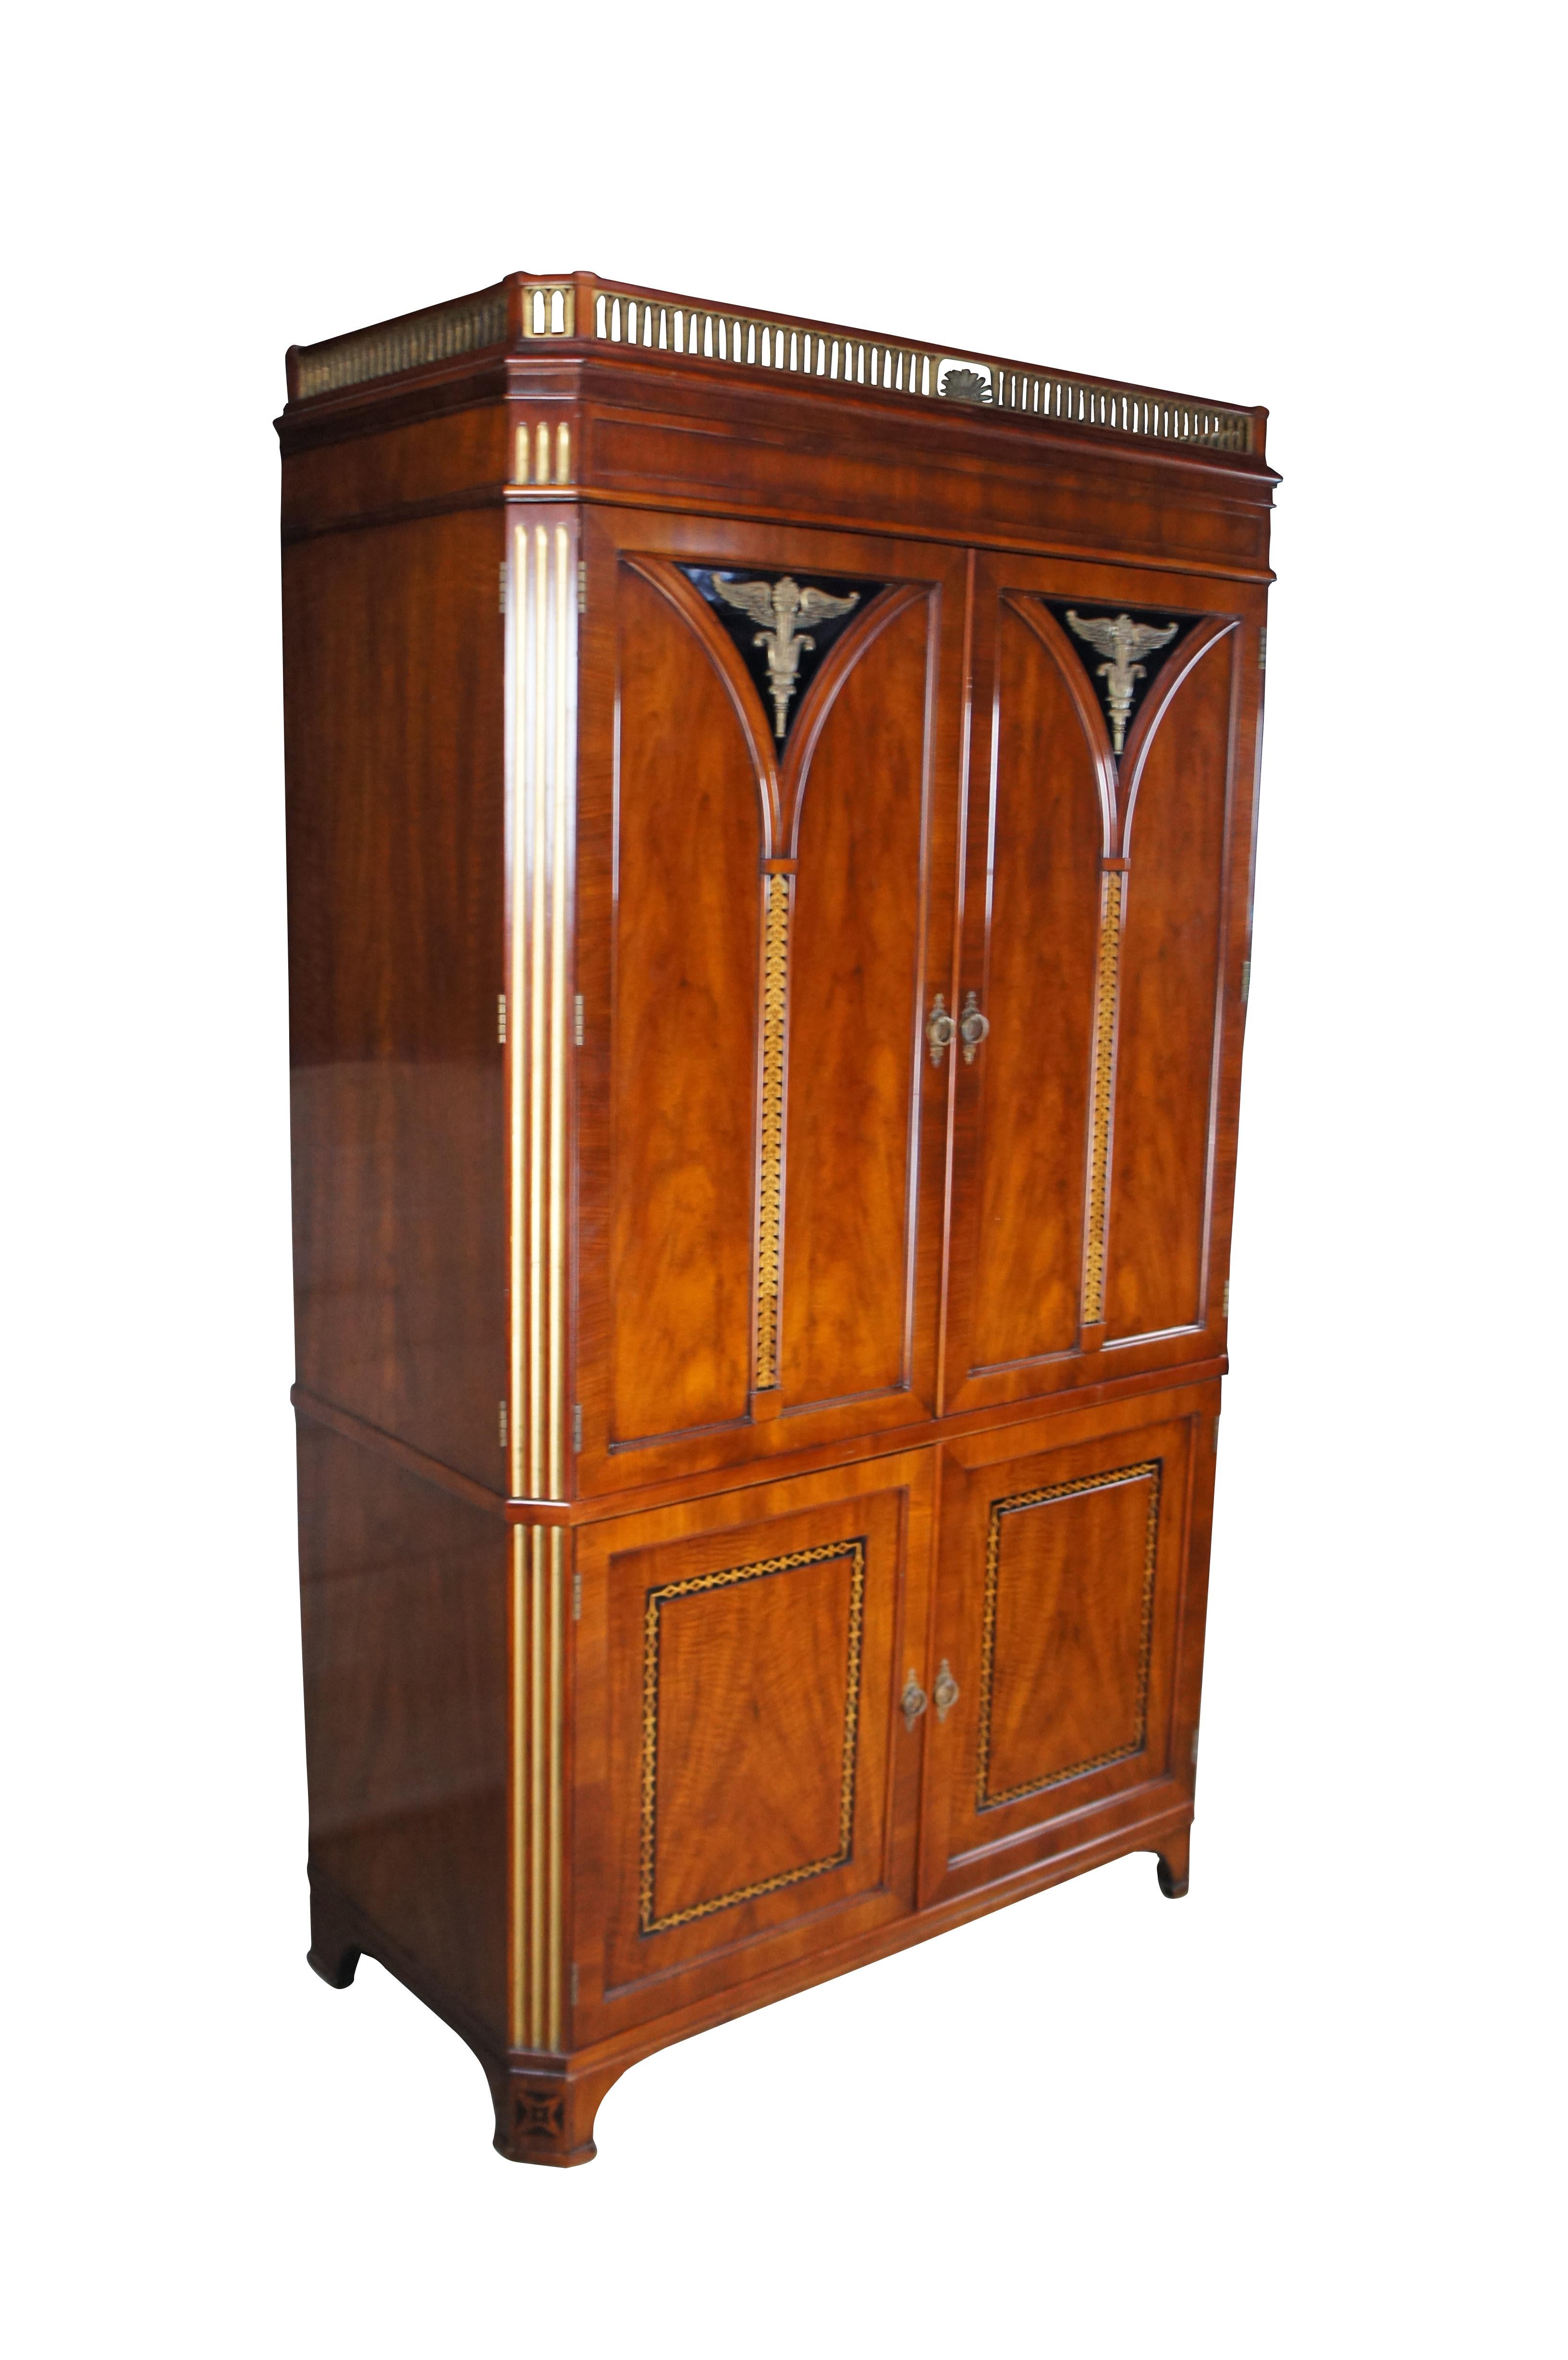 John Widdicomb French Empire / Deco inspired Armoire, circa 1970s. Made from cherry with paneled doors featuring ornate winged torchiere mounts in bronze over inlaid vine motif. Corners are chamfered and fluted in gold. The cabinet has an ornate